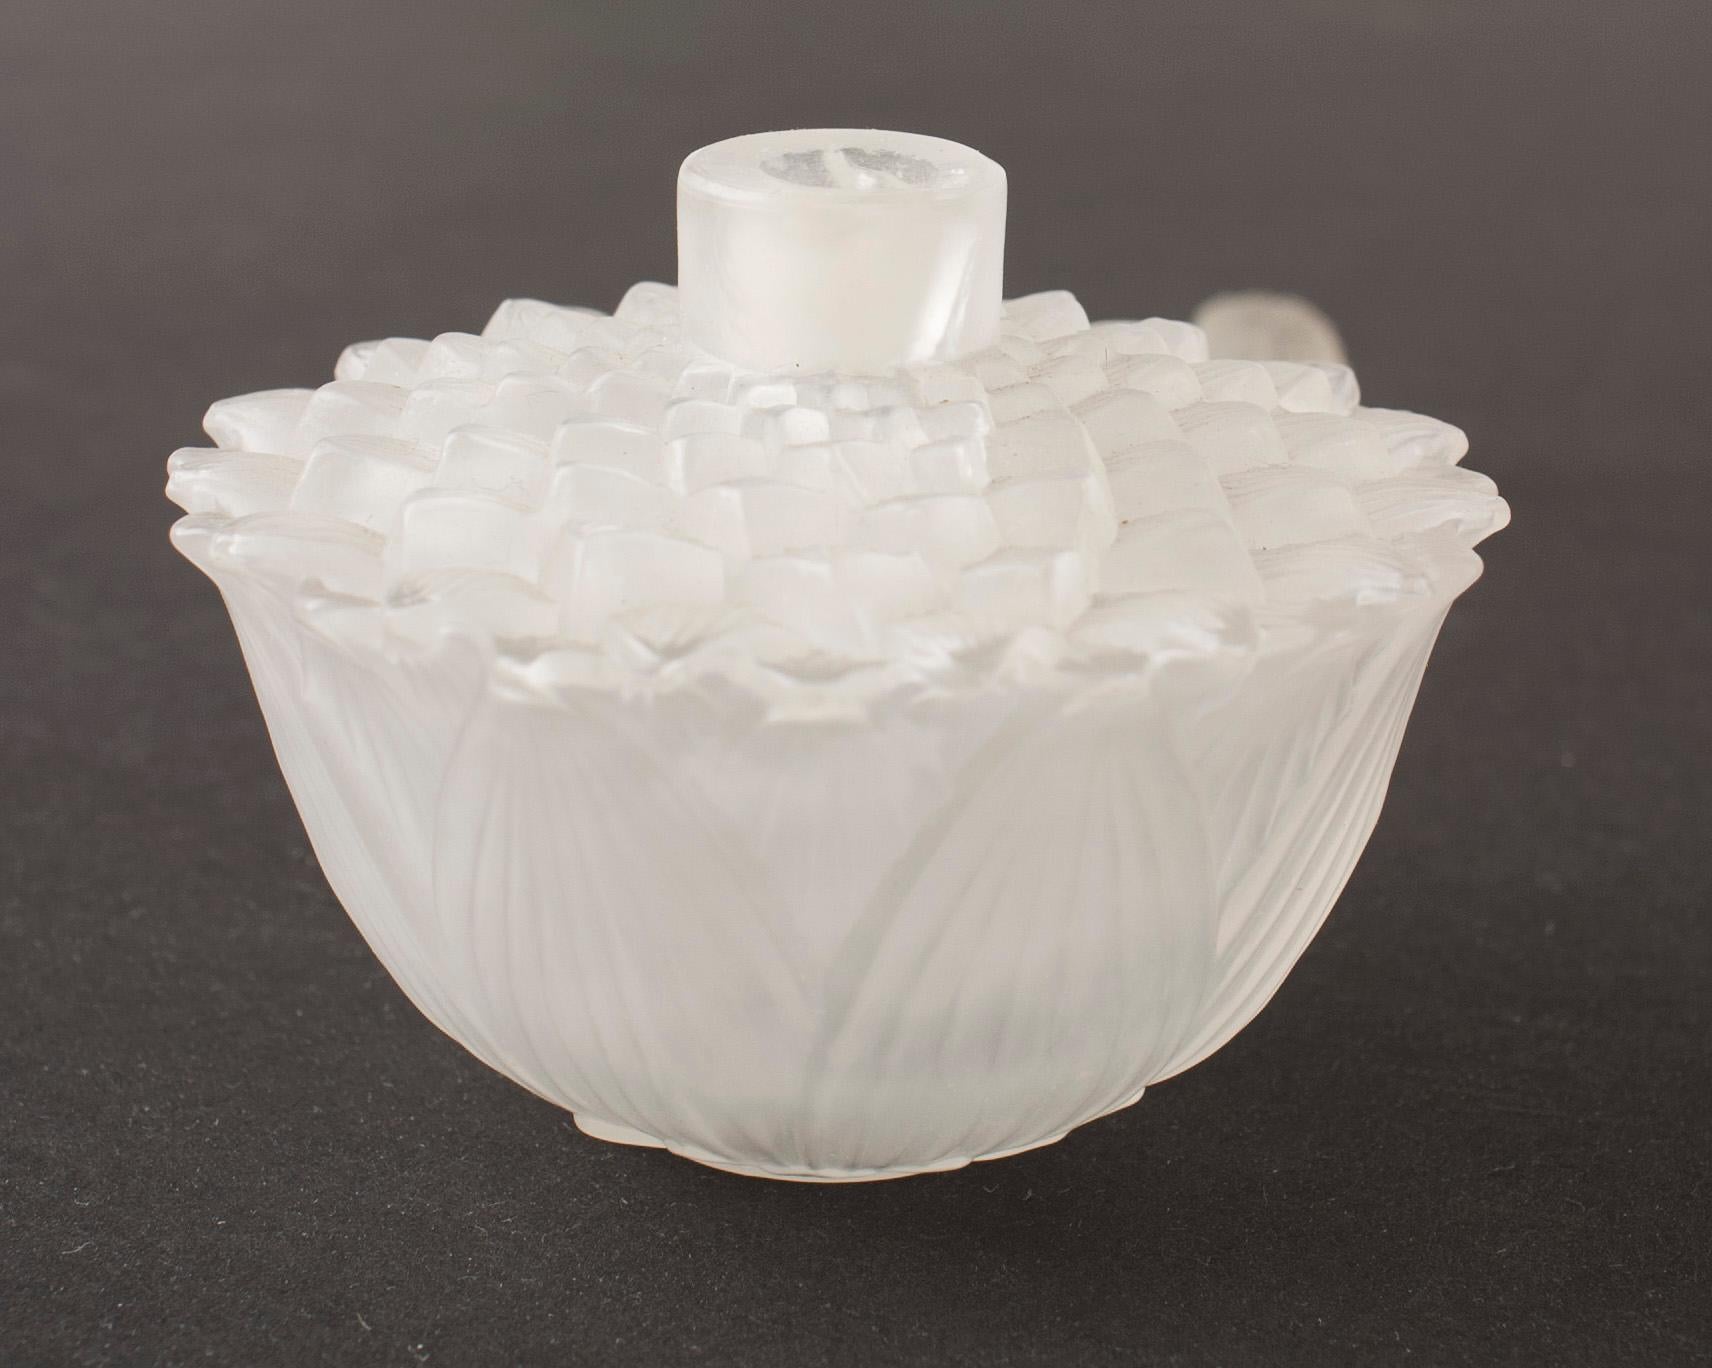 French Art Deco flower-shaped glass perfume bottle with molded lotus style petals around the exterior and a dome-shaped stopper (signed Lalique) (as is- crack on neck).
 